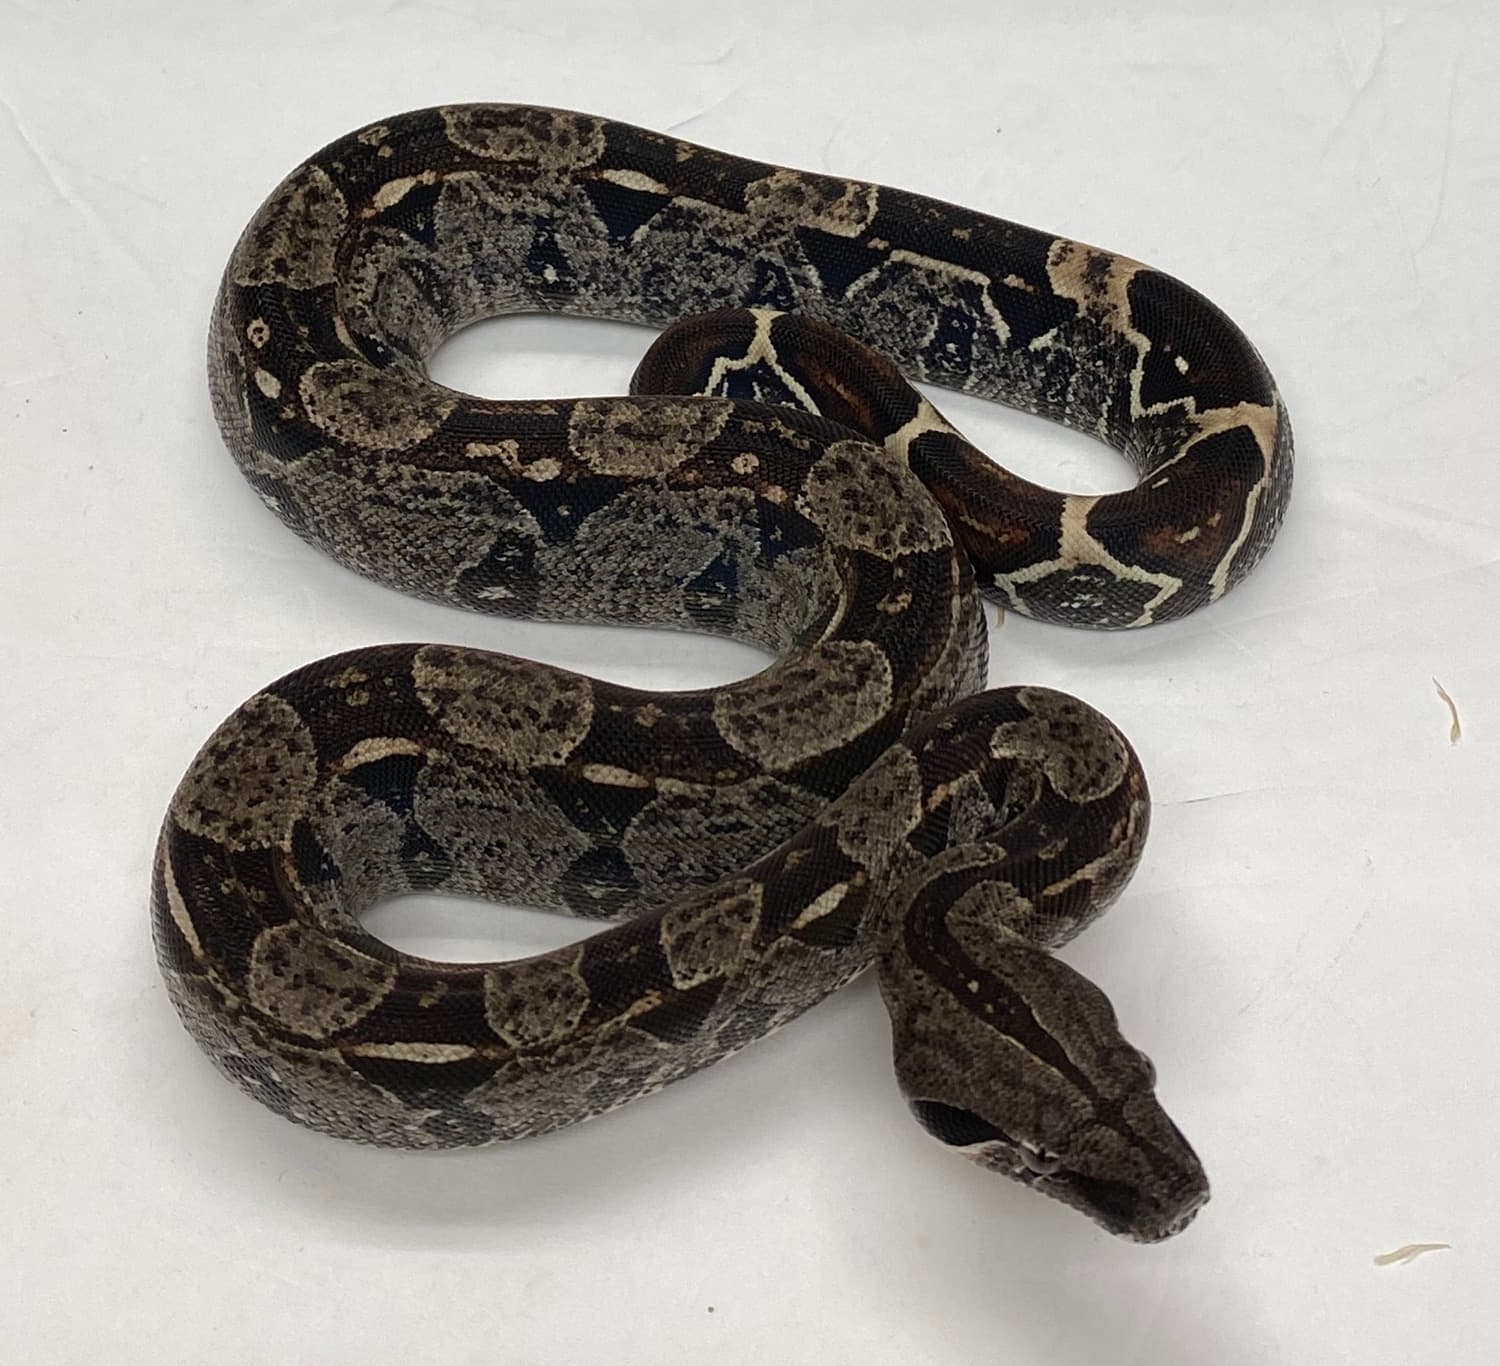 IMG 66% Het VPI T+ Boa Constrictor by Motion Reptiles